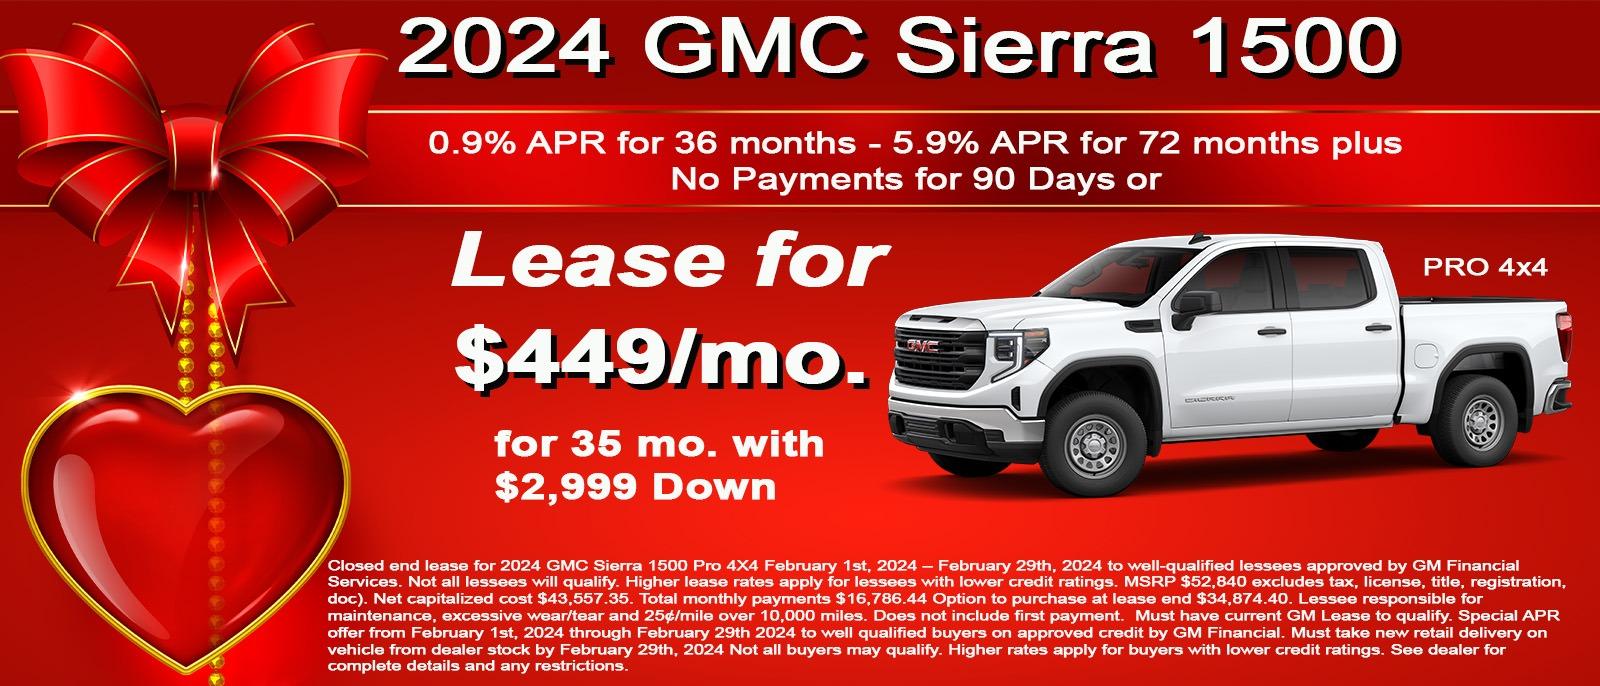 Get your new 2024 Sierra 1500 for only $449 month